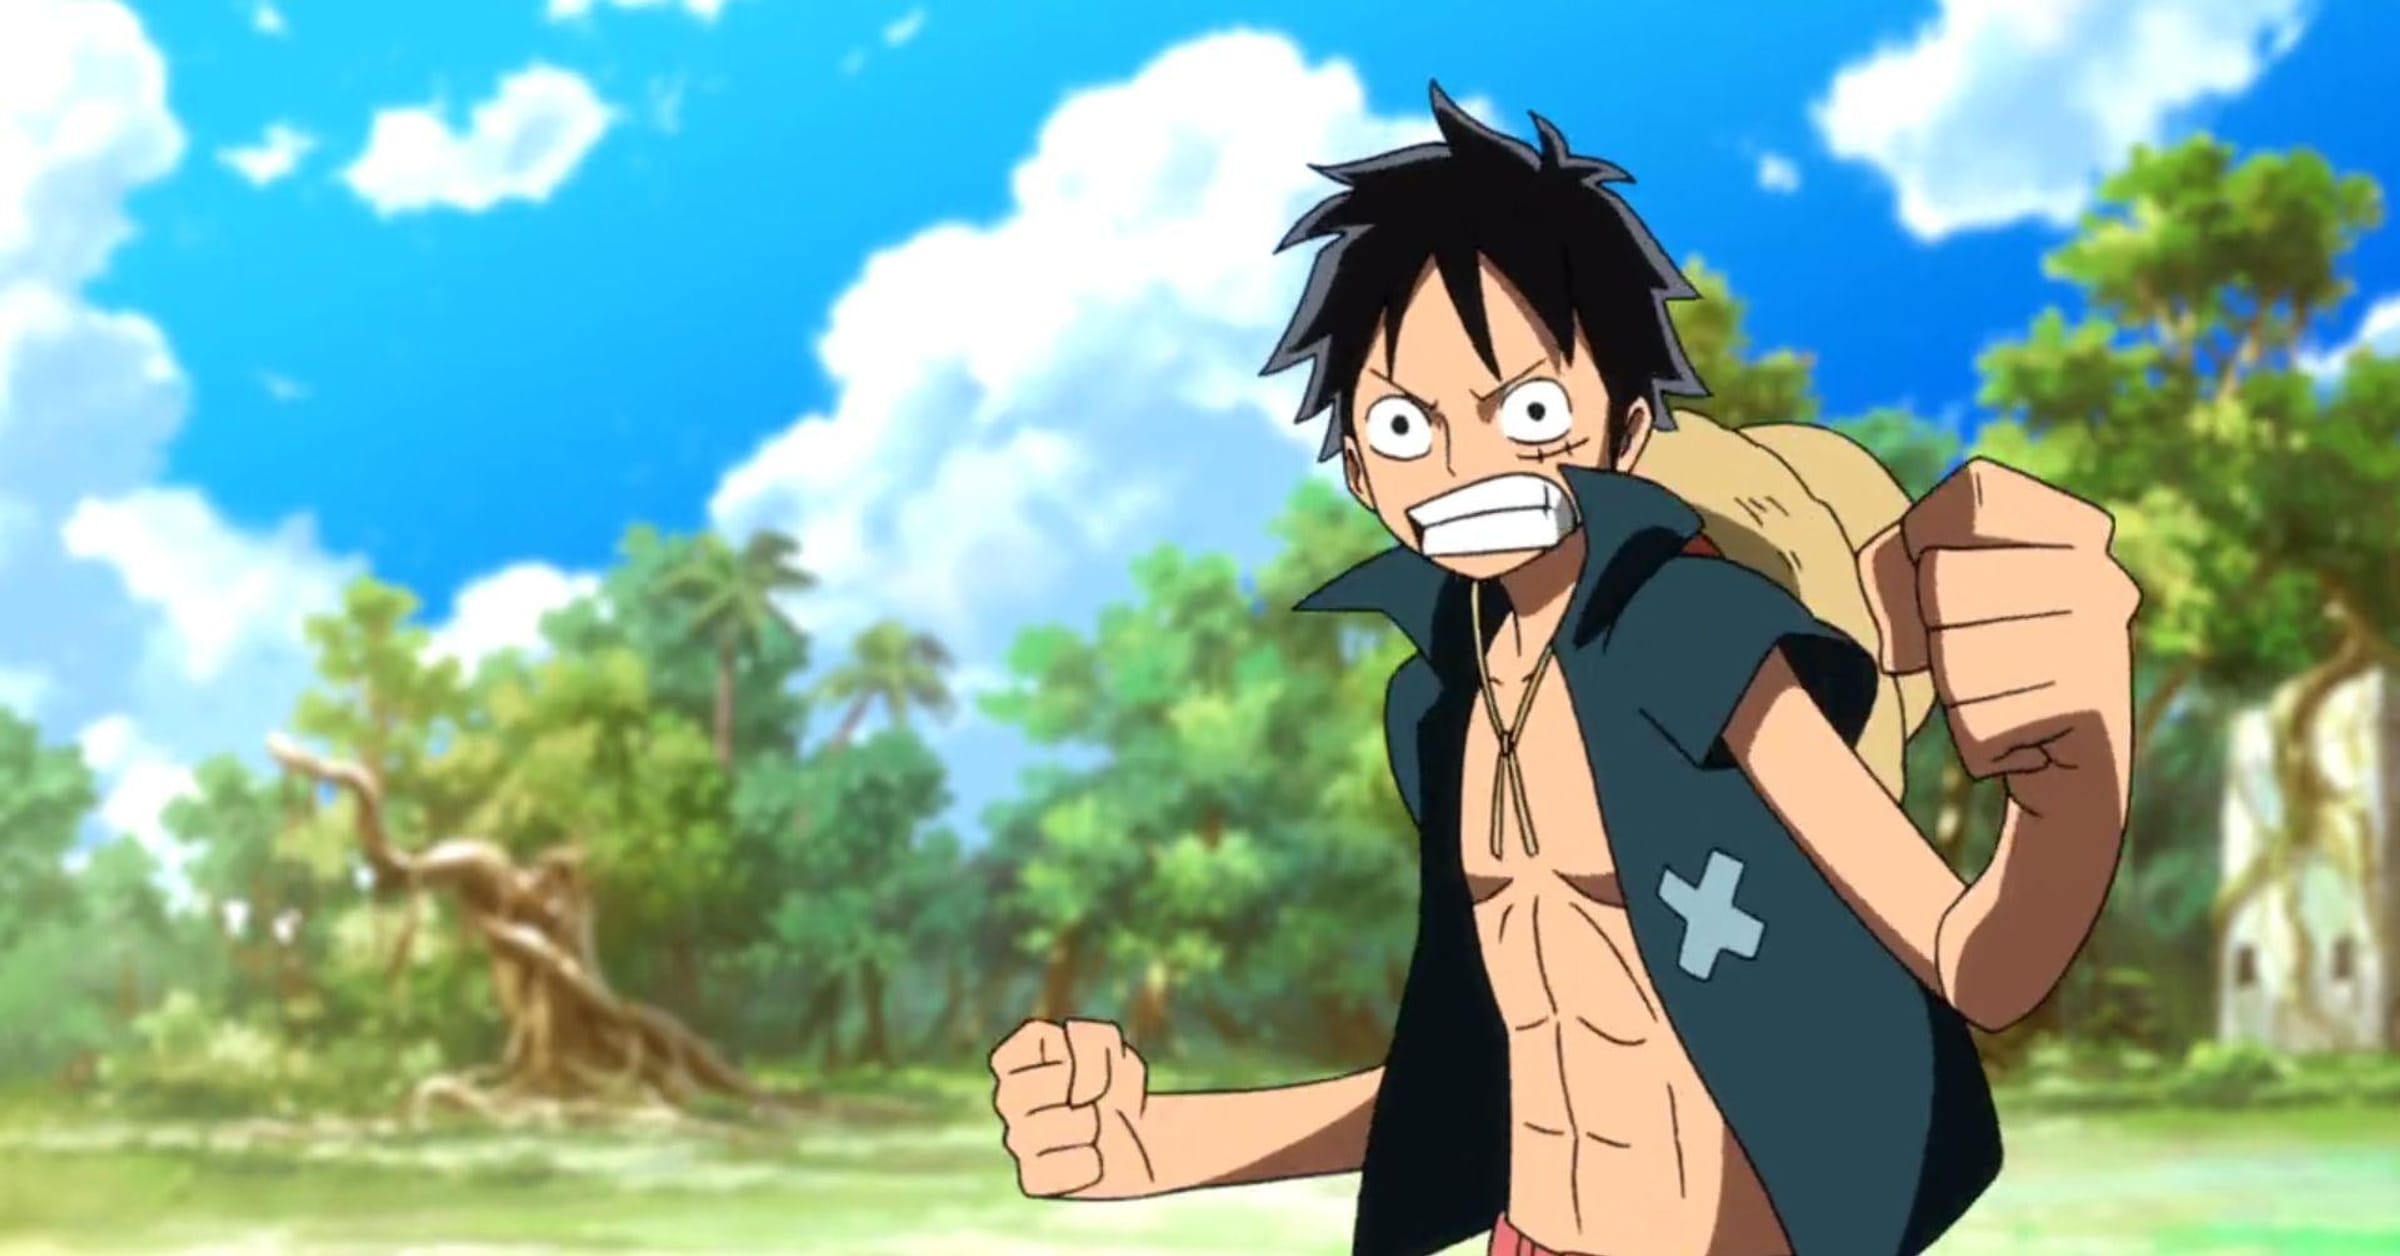 One Piece's Luffy, 'Attack On Titan' Eren: The most popular anime characters,  ranked